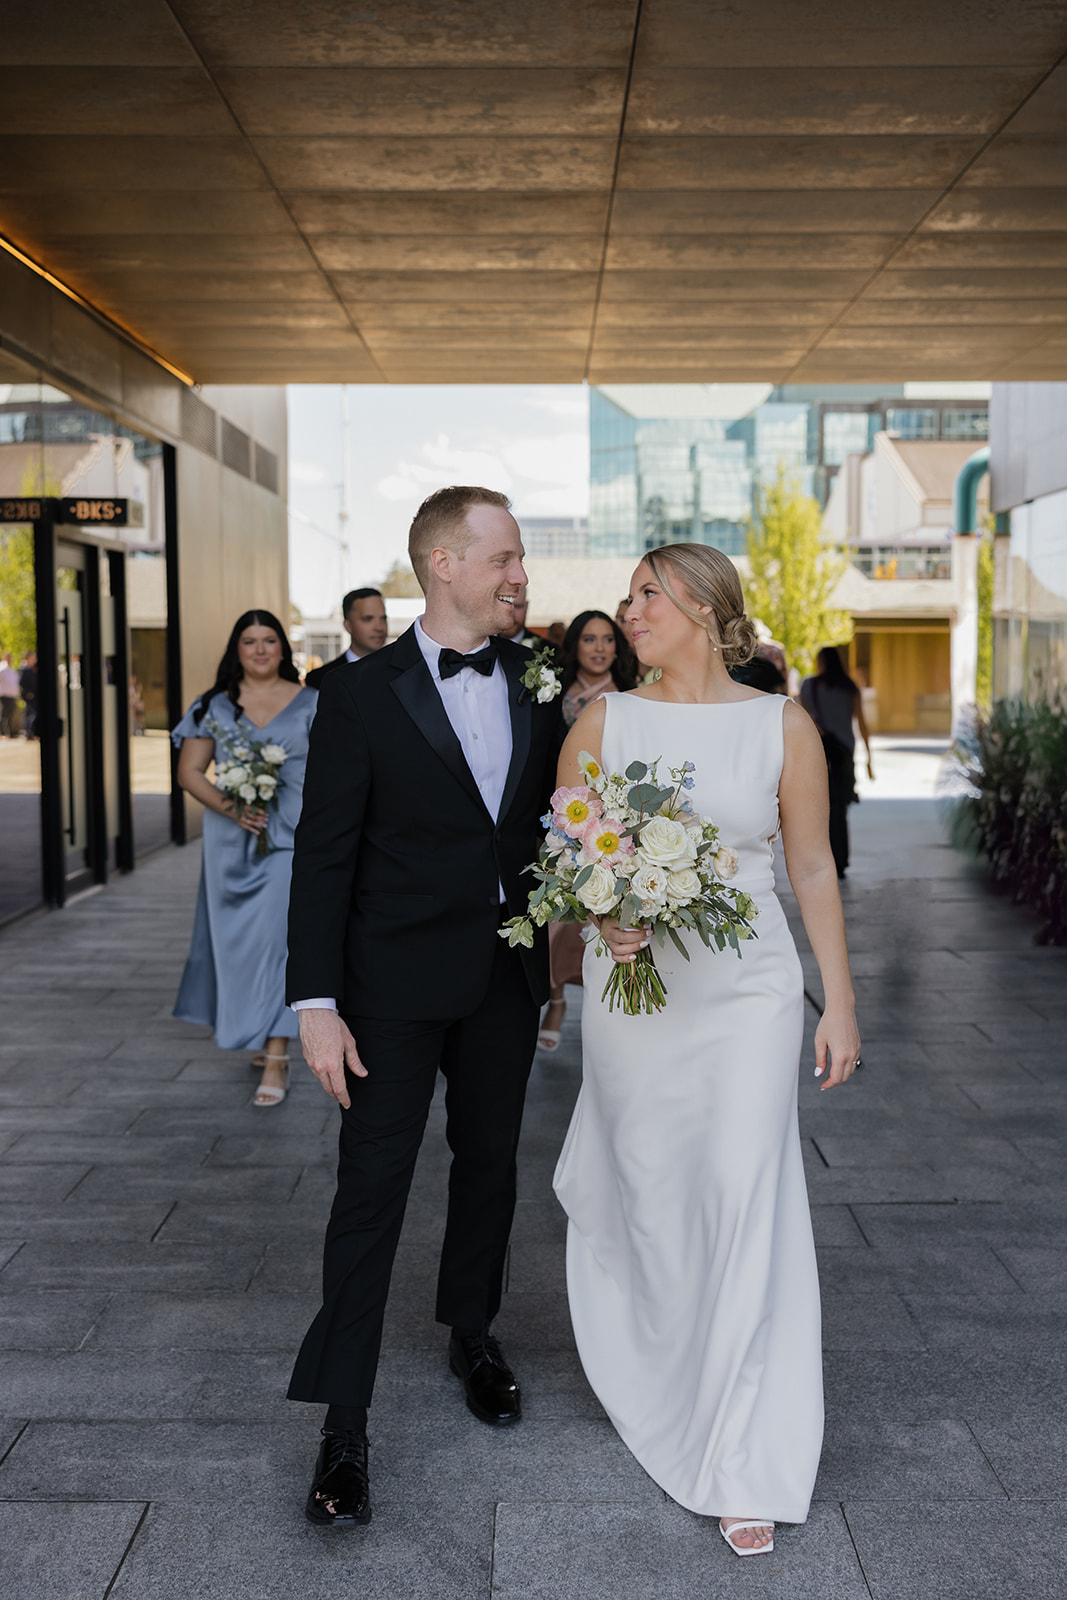 Halifax Wedding Photography at Pickford & Black; Wedding photographer based in Nova Scotia; Janelle Connor Photography